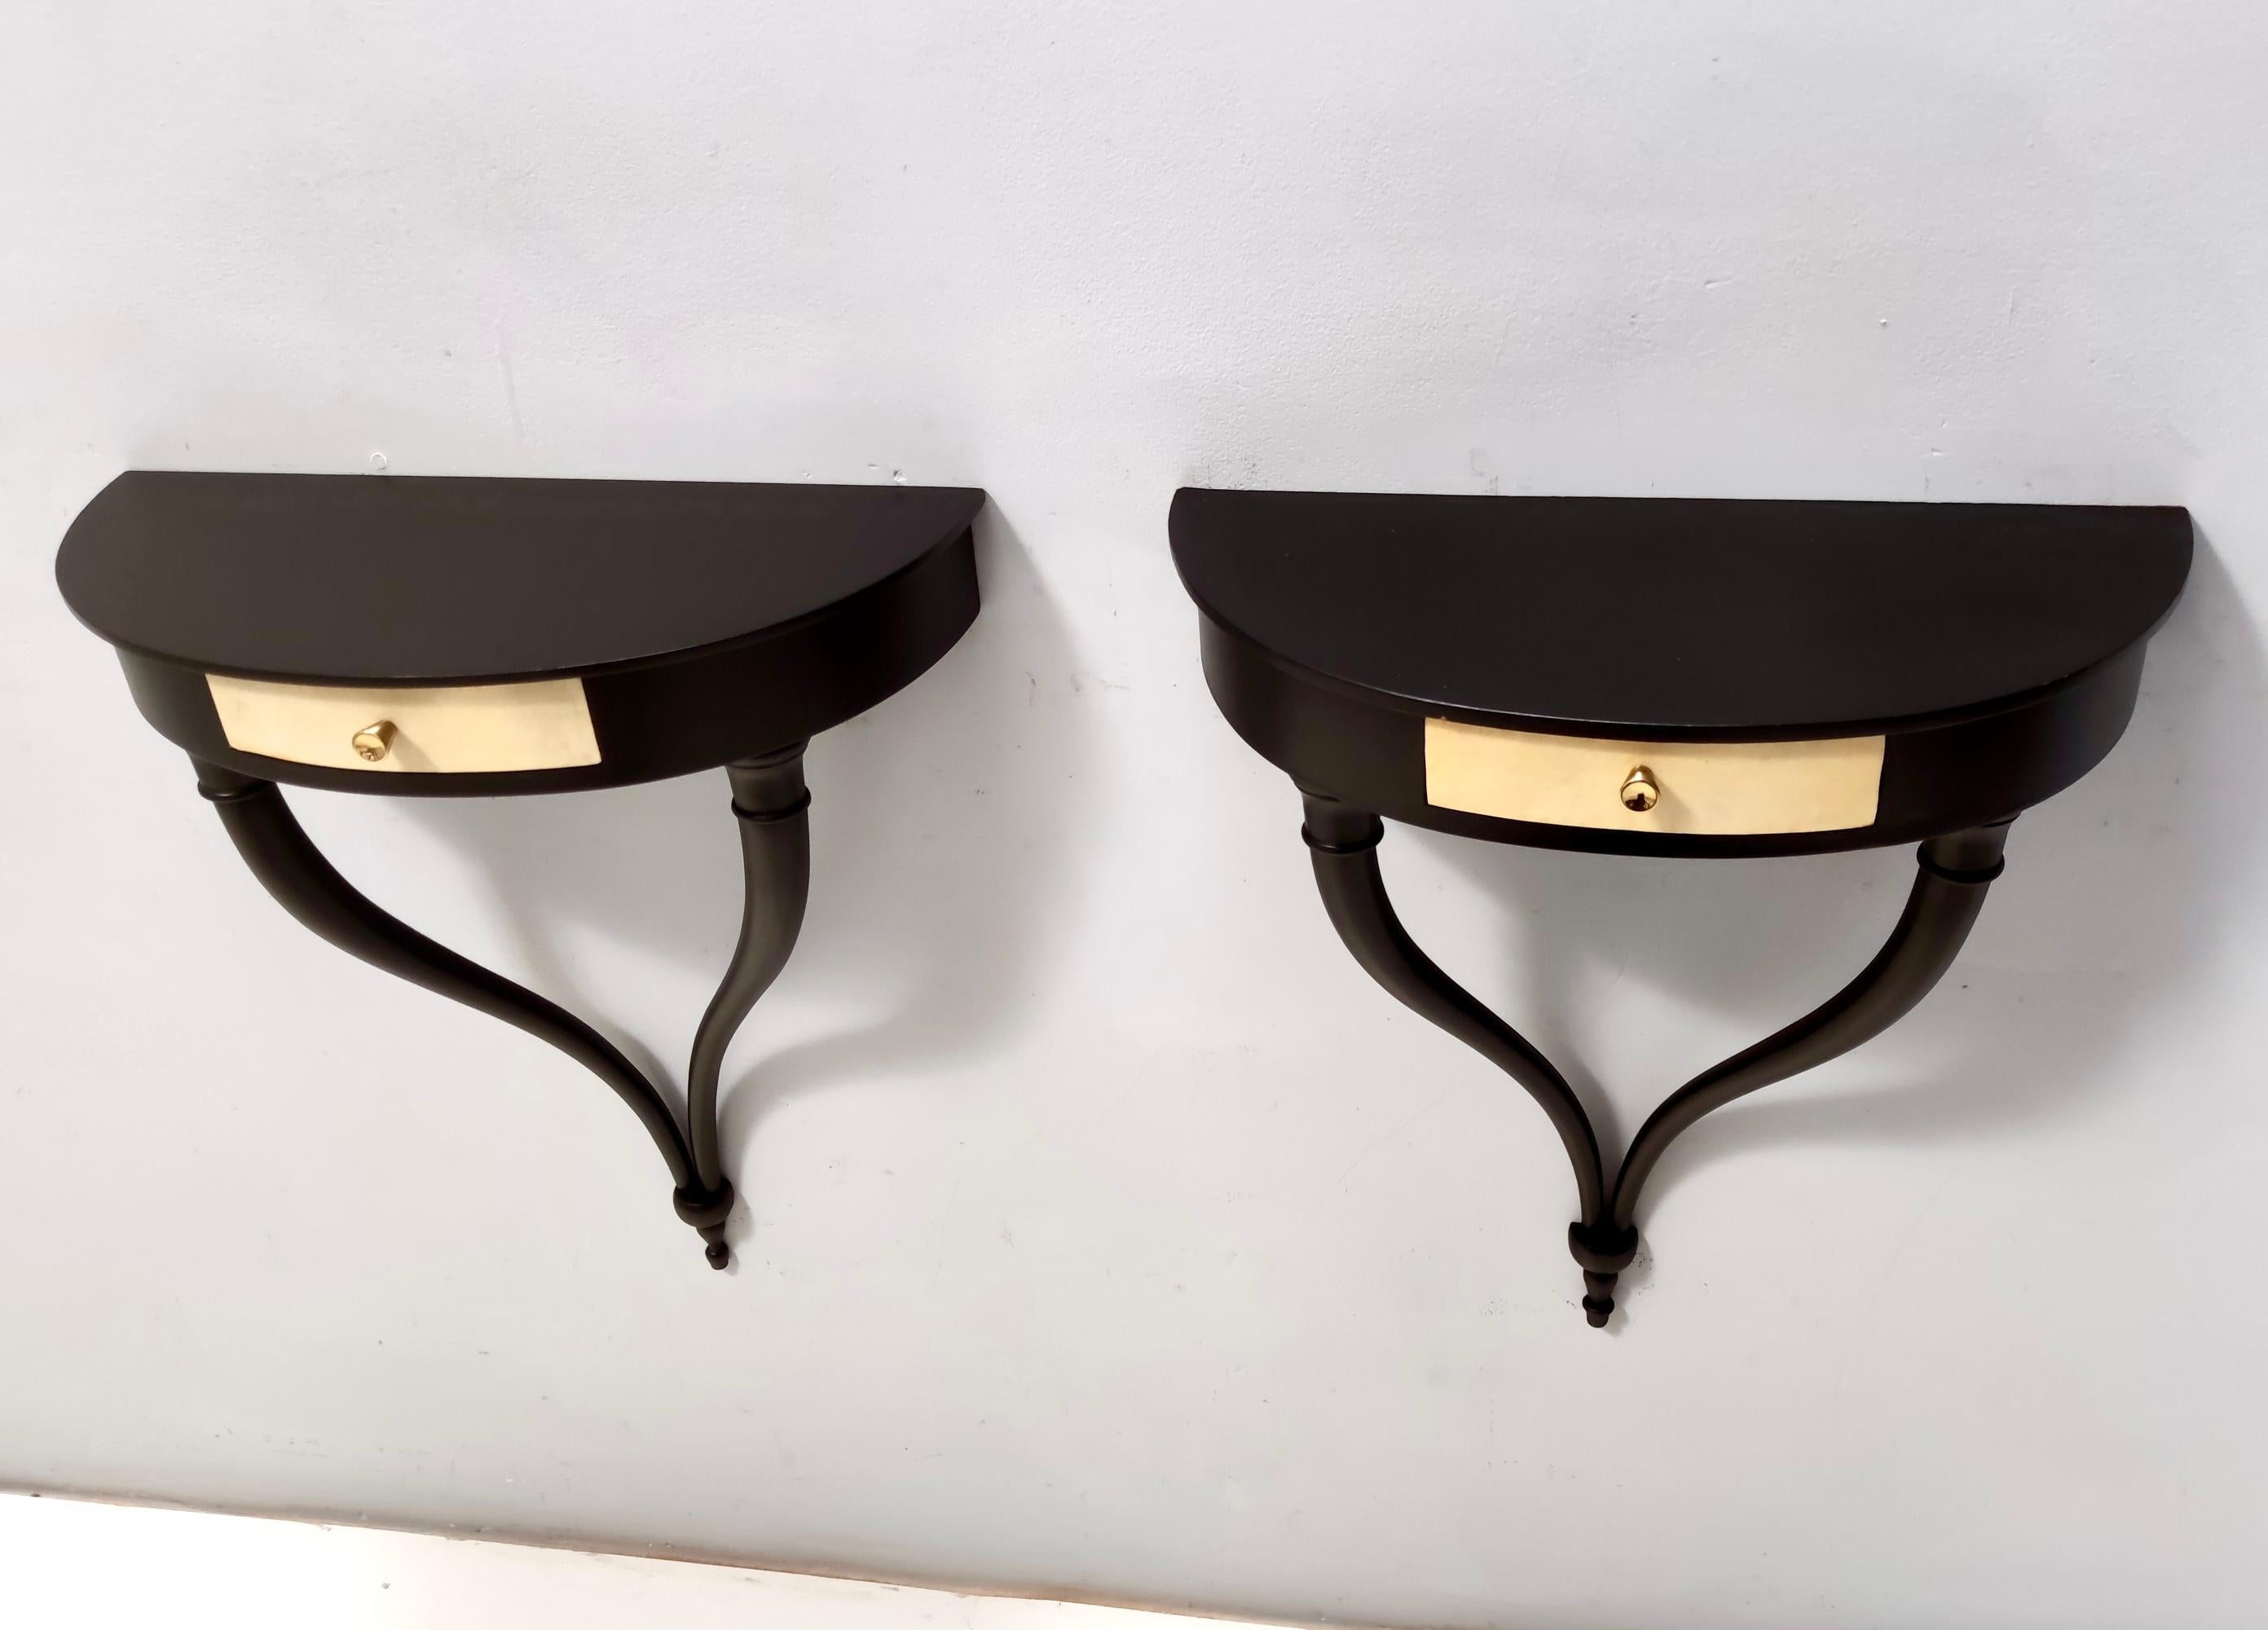 Brass Pair of Wall-Mounted Console Tables / Nightstands by Guglielmo Ulrich, Italy